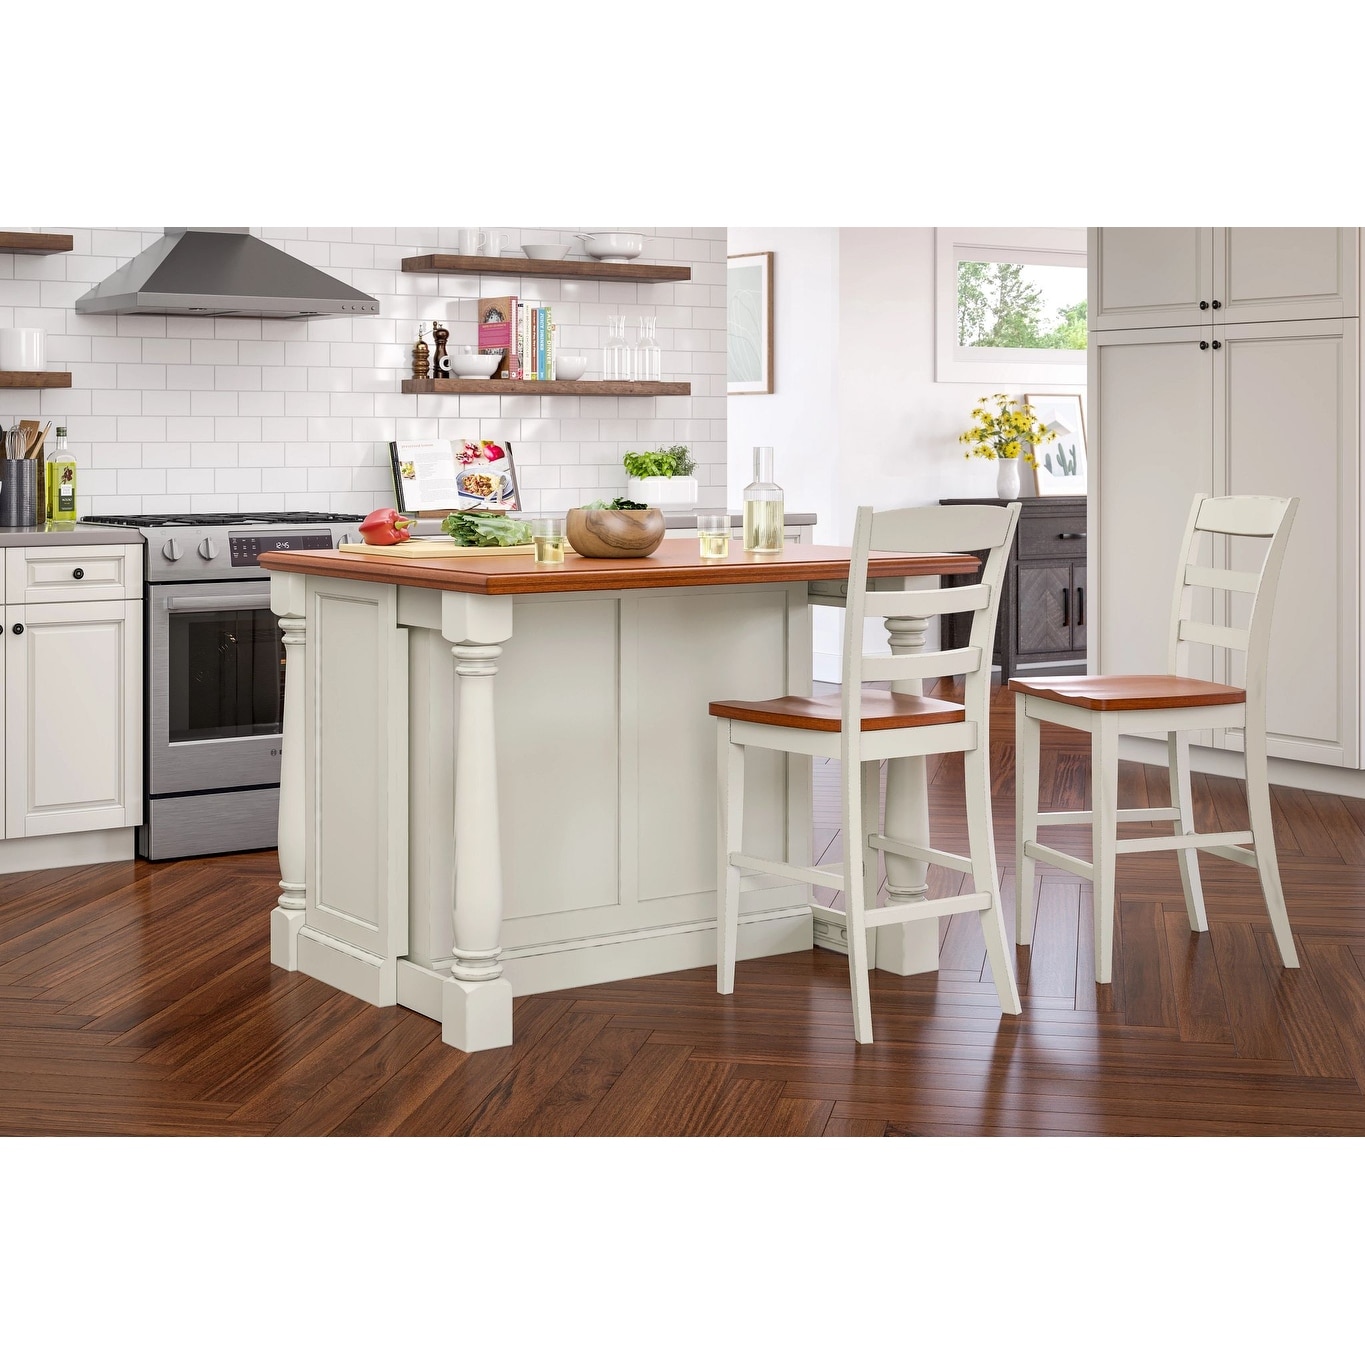 https://ak1.ostkcdn.com/images/products/is/images/direct/e131555cd39381b1bc6cab73c2867b1871bbcf13/Homestyles-Monarch-3-Piece-Off-White-Wood-Kitchen-Island-Set-with-Wood-Top.jpg